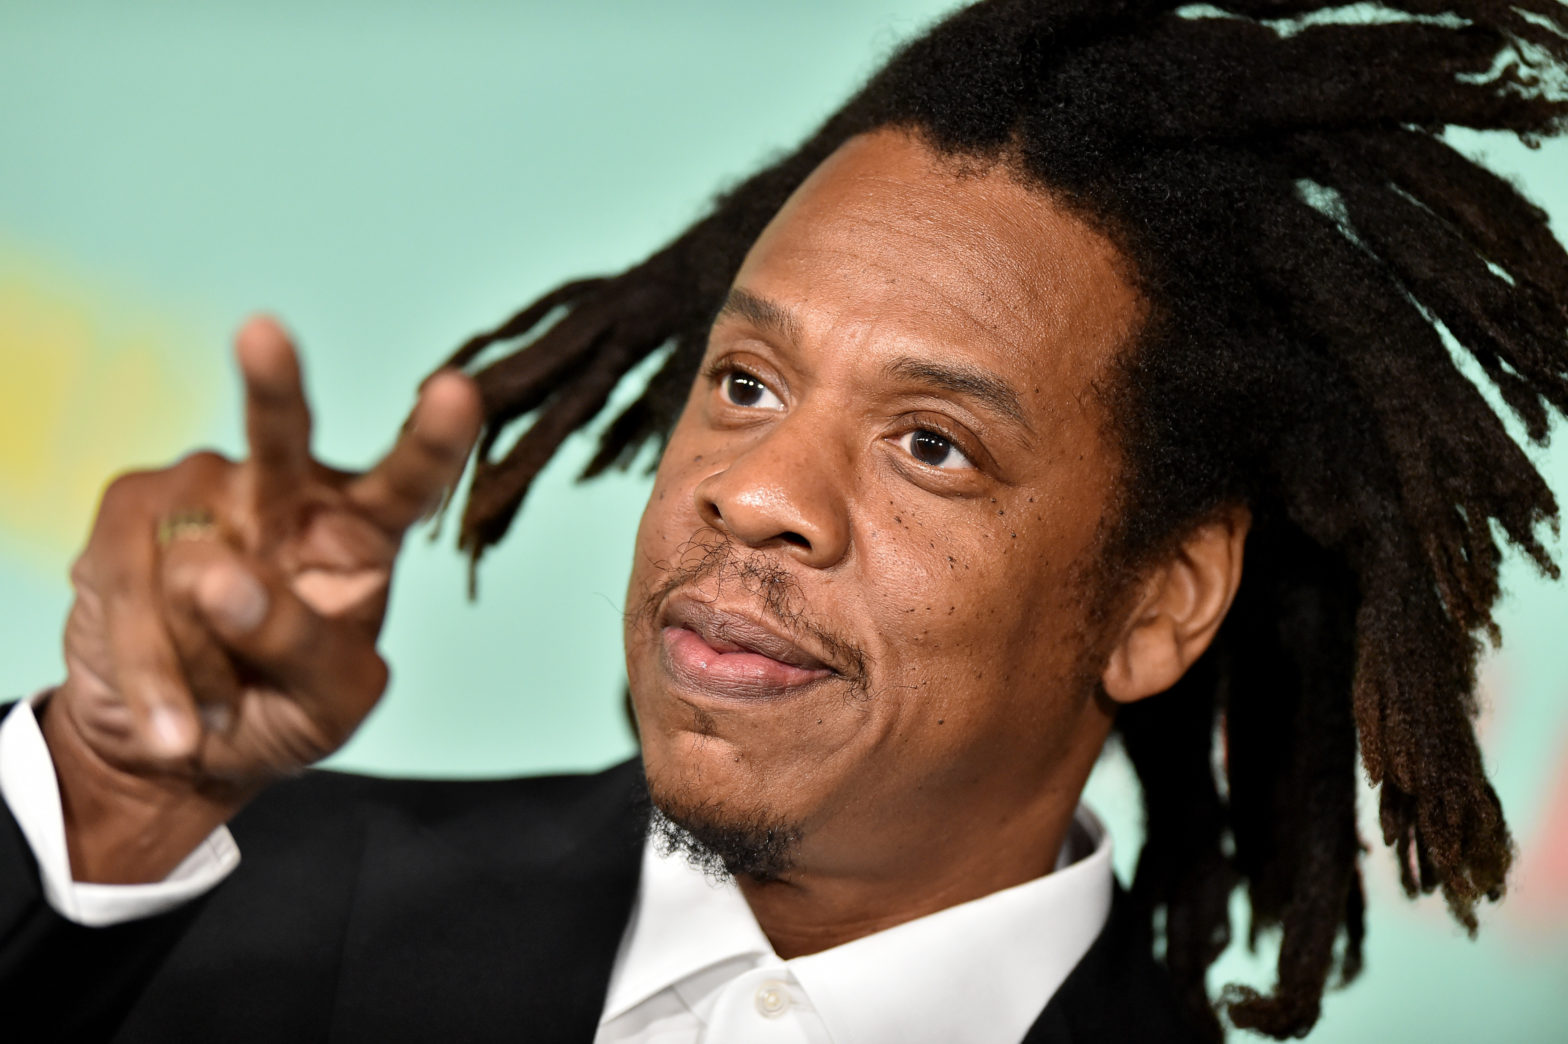 Is Jay-Z Looking To Sell His Ownership Stake In D'Ussé?